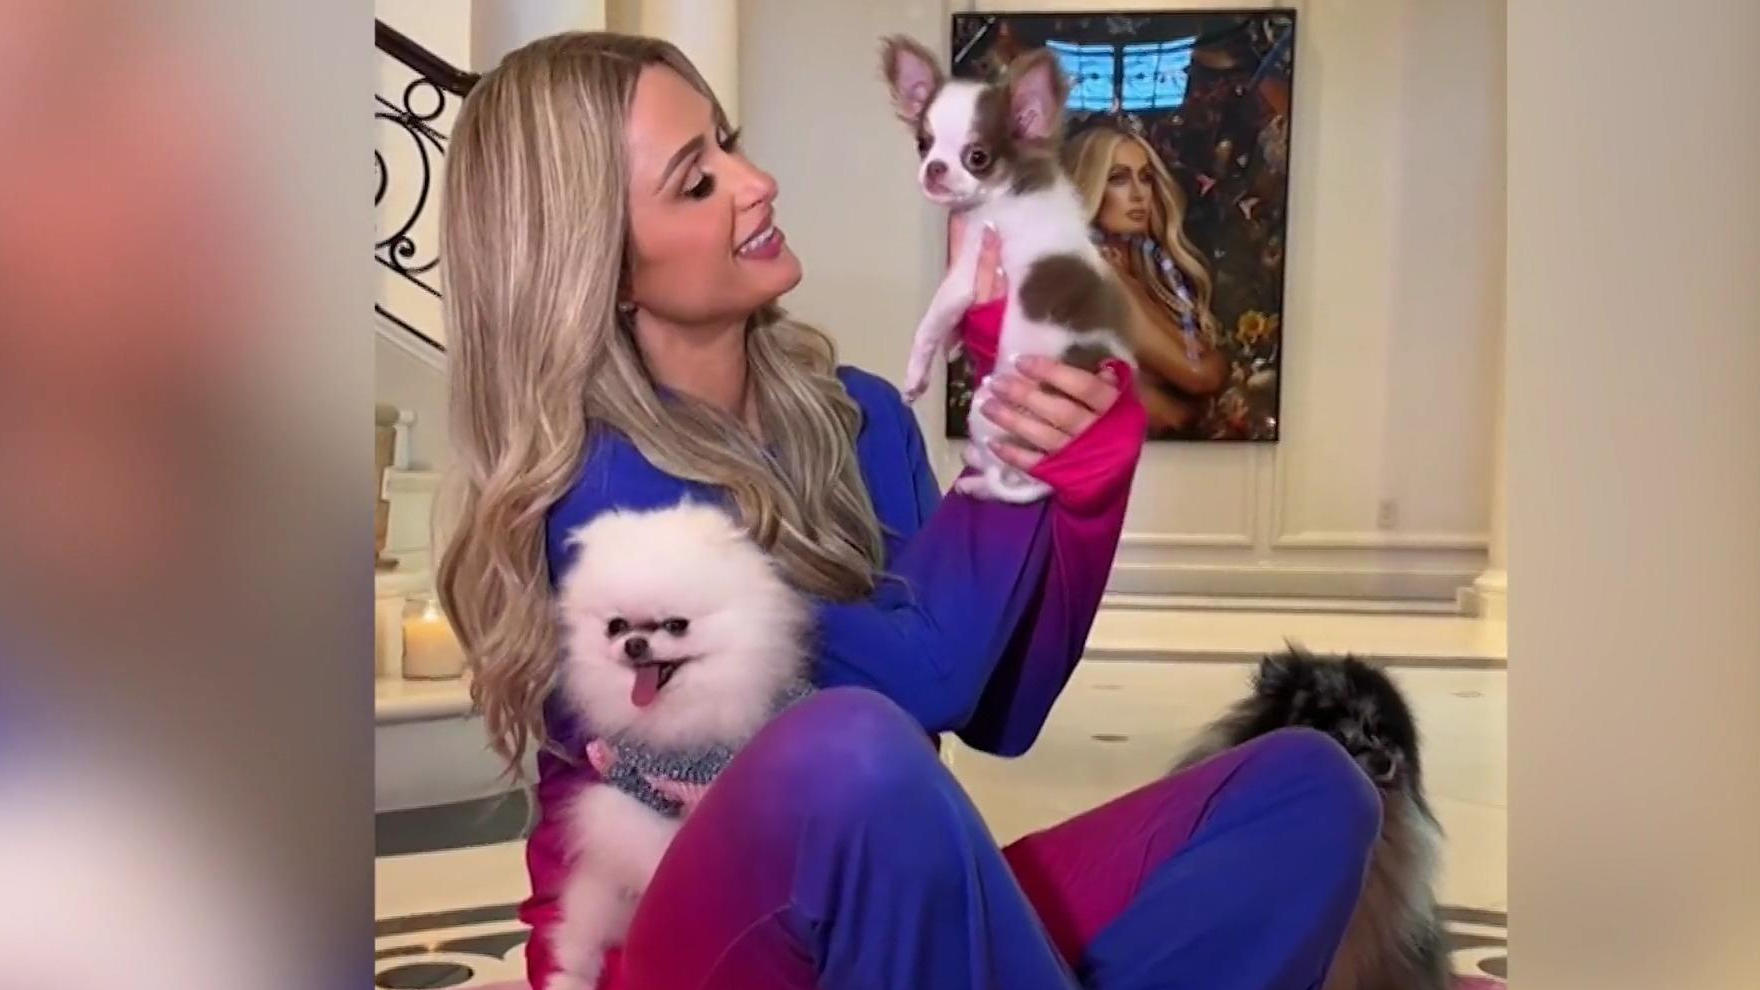 Her new Chihuahua gets her in trouble with PETA!  New luck for Paris Hilton?